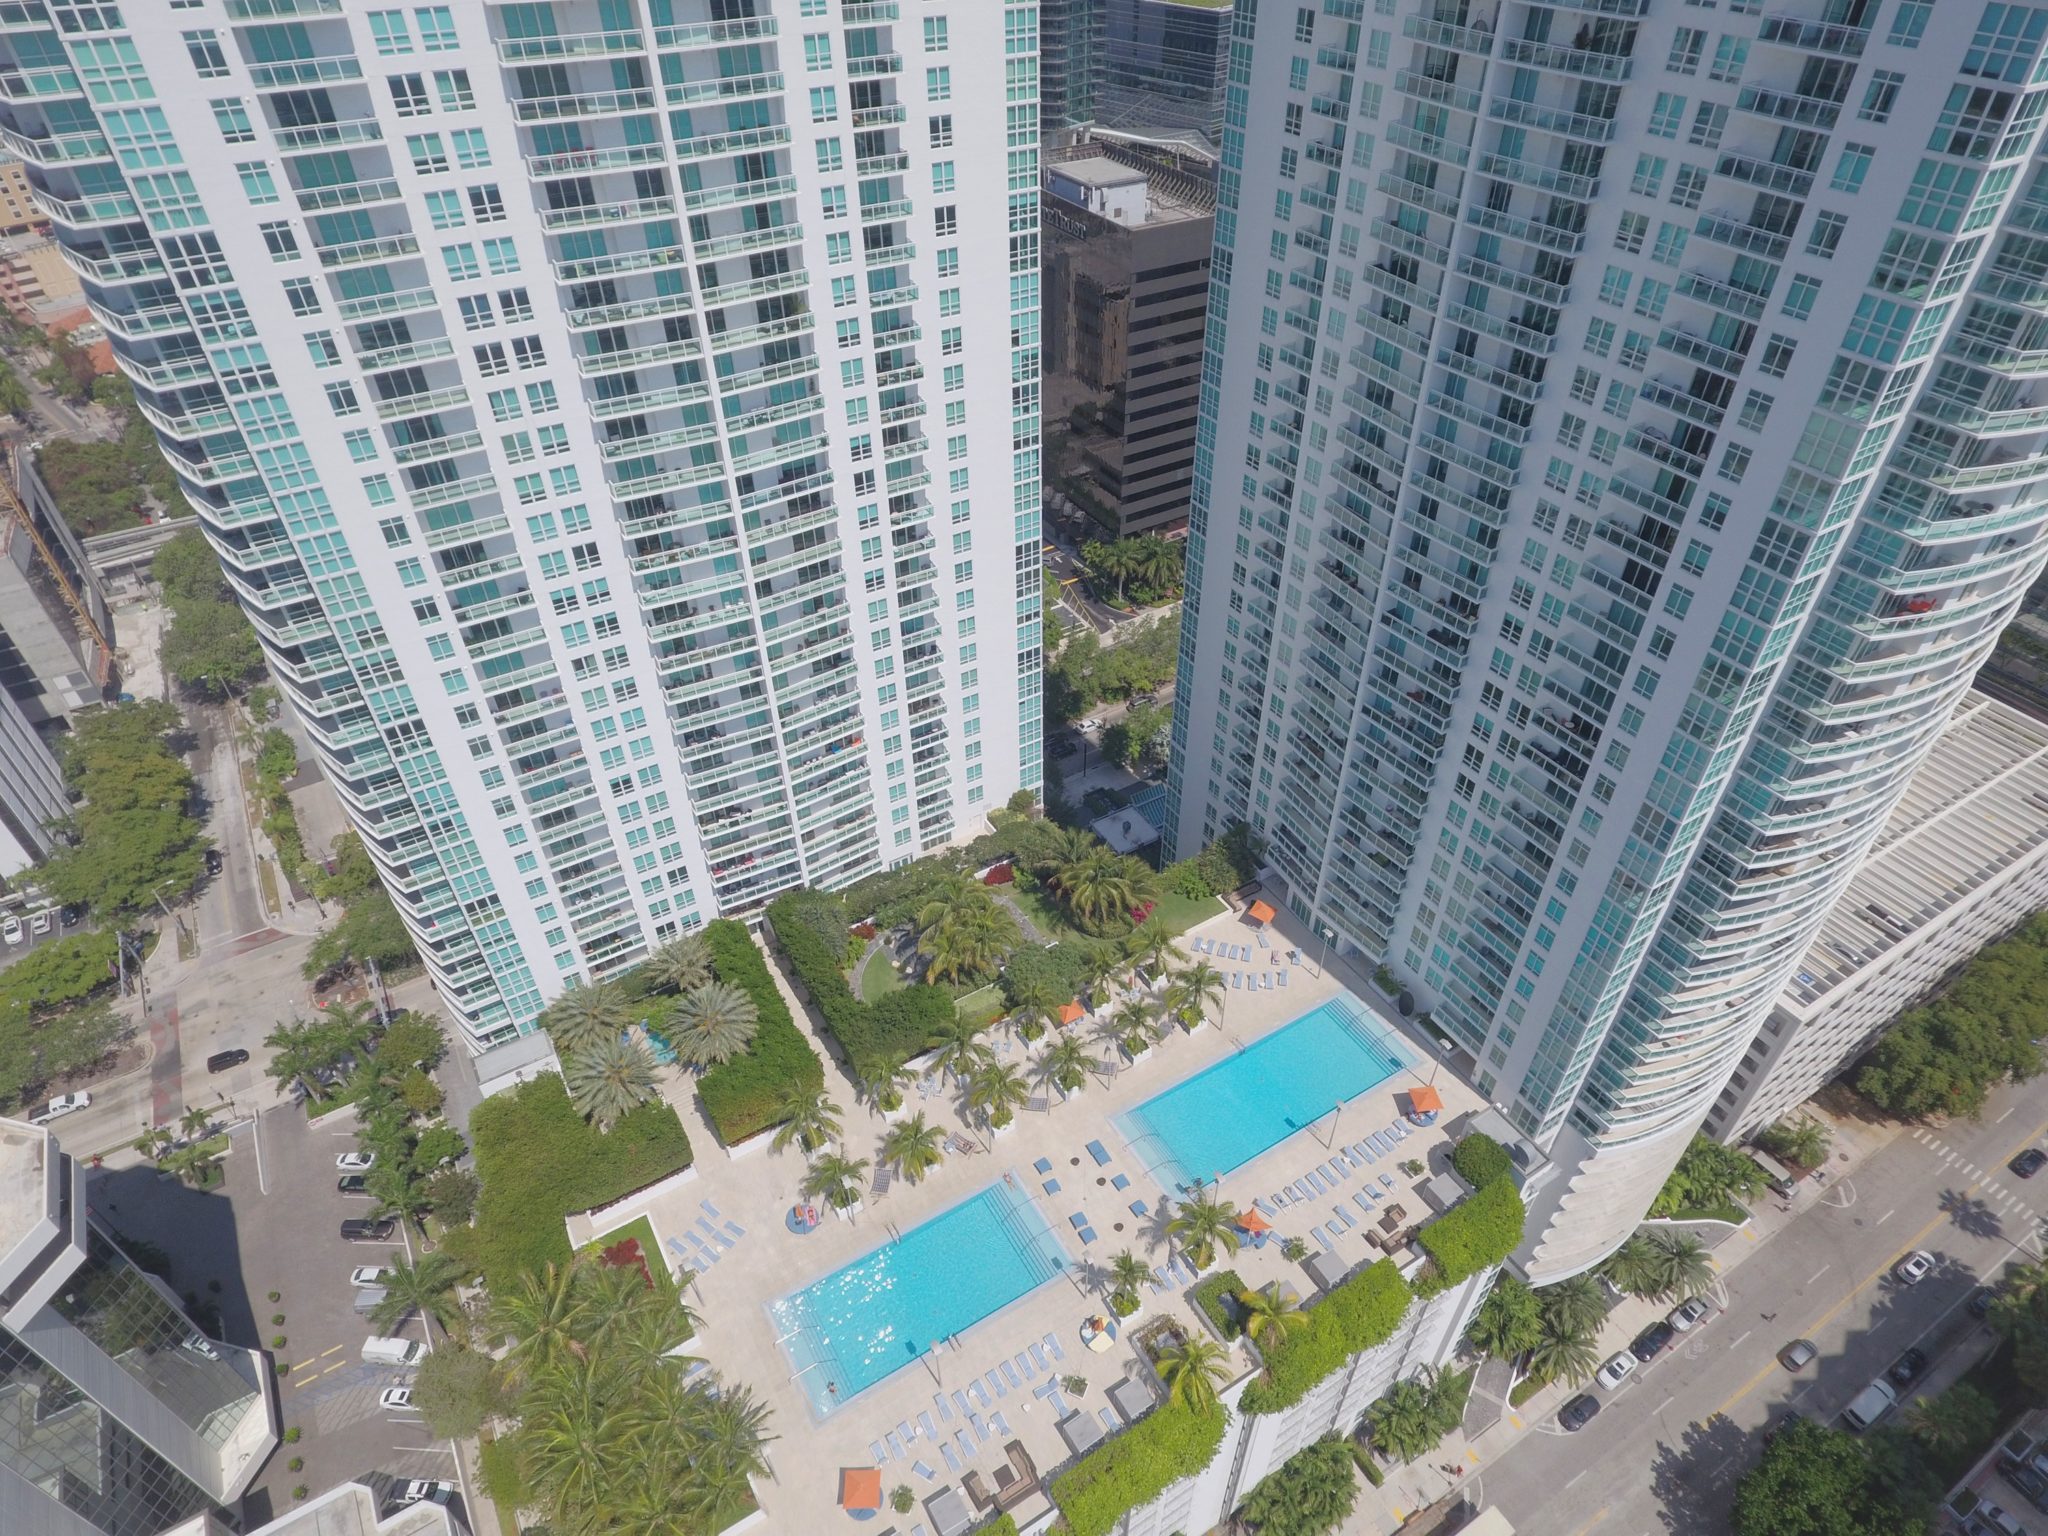 The Plaza on Brickell – Benefits Of Buying A Luxury Condo In Brickell’s Exclusive